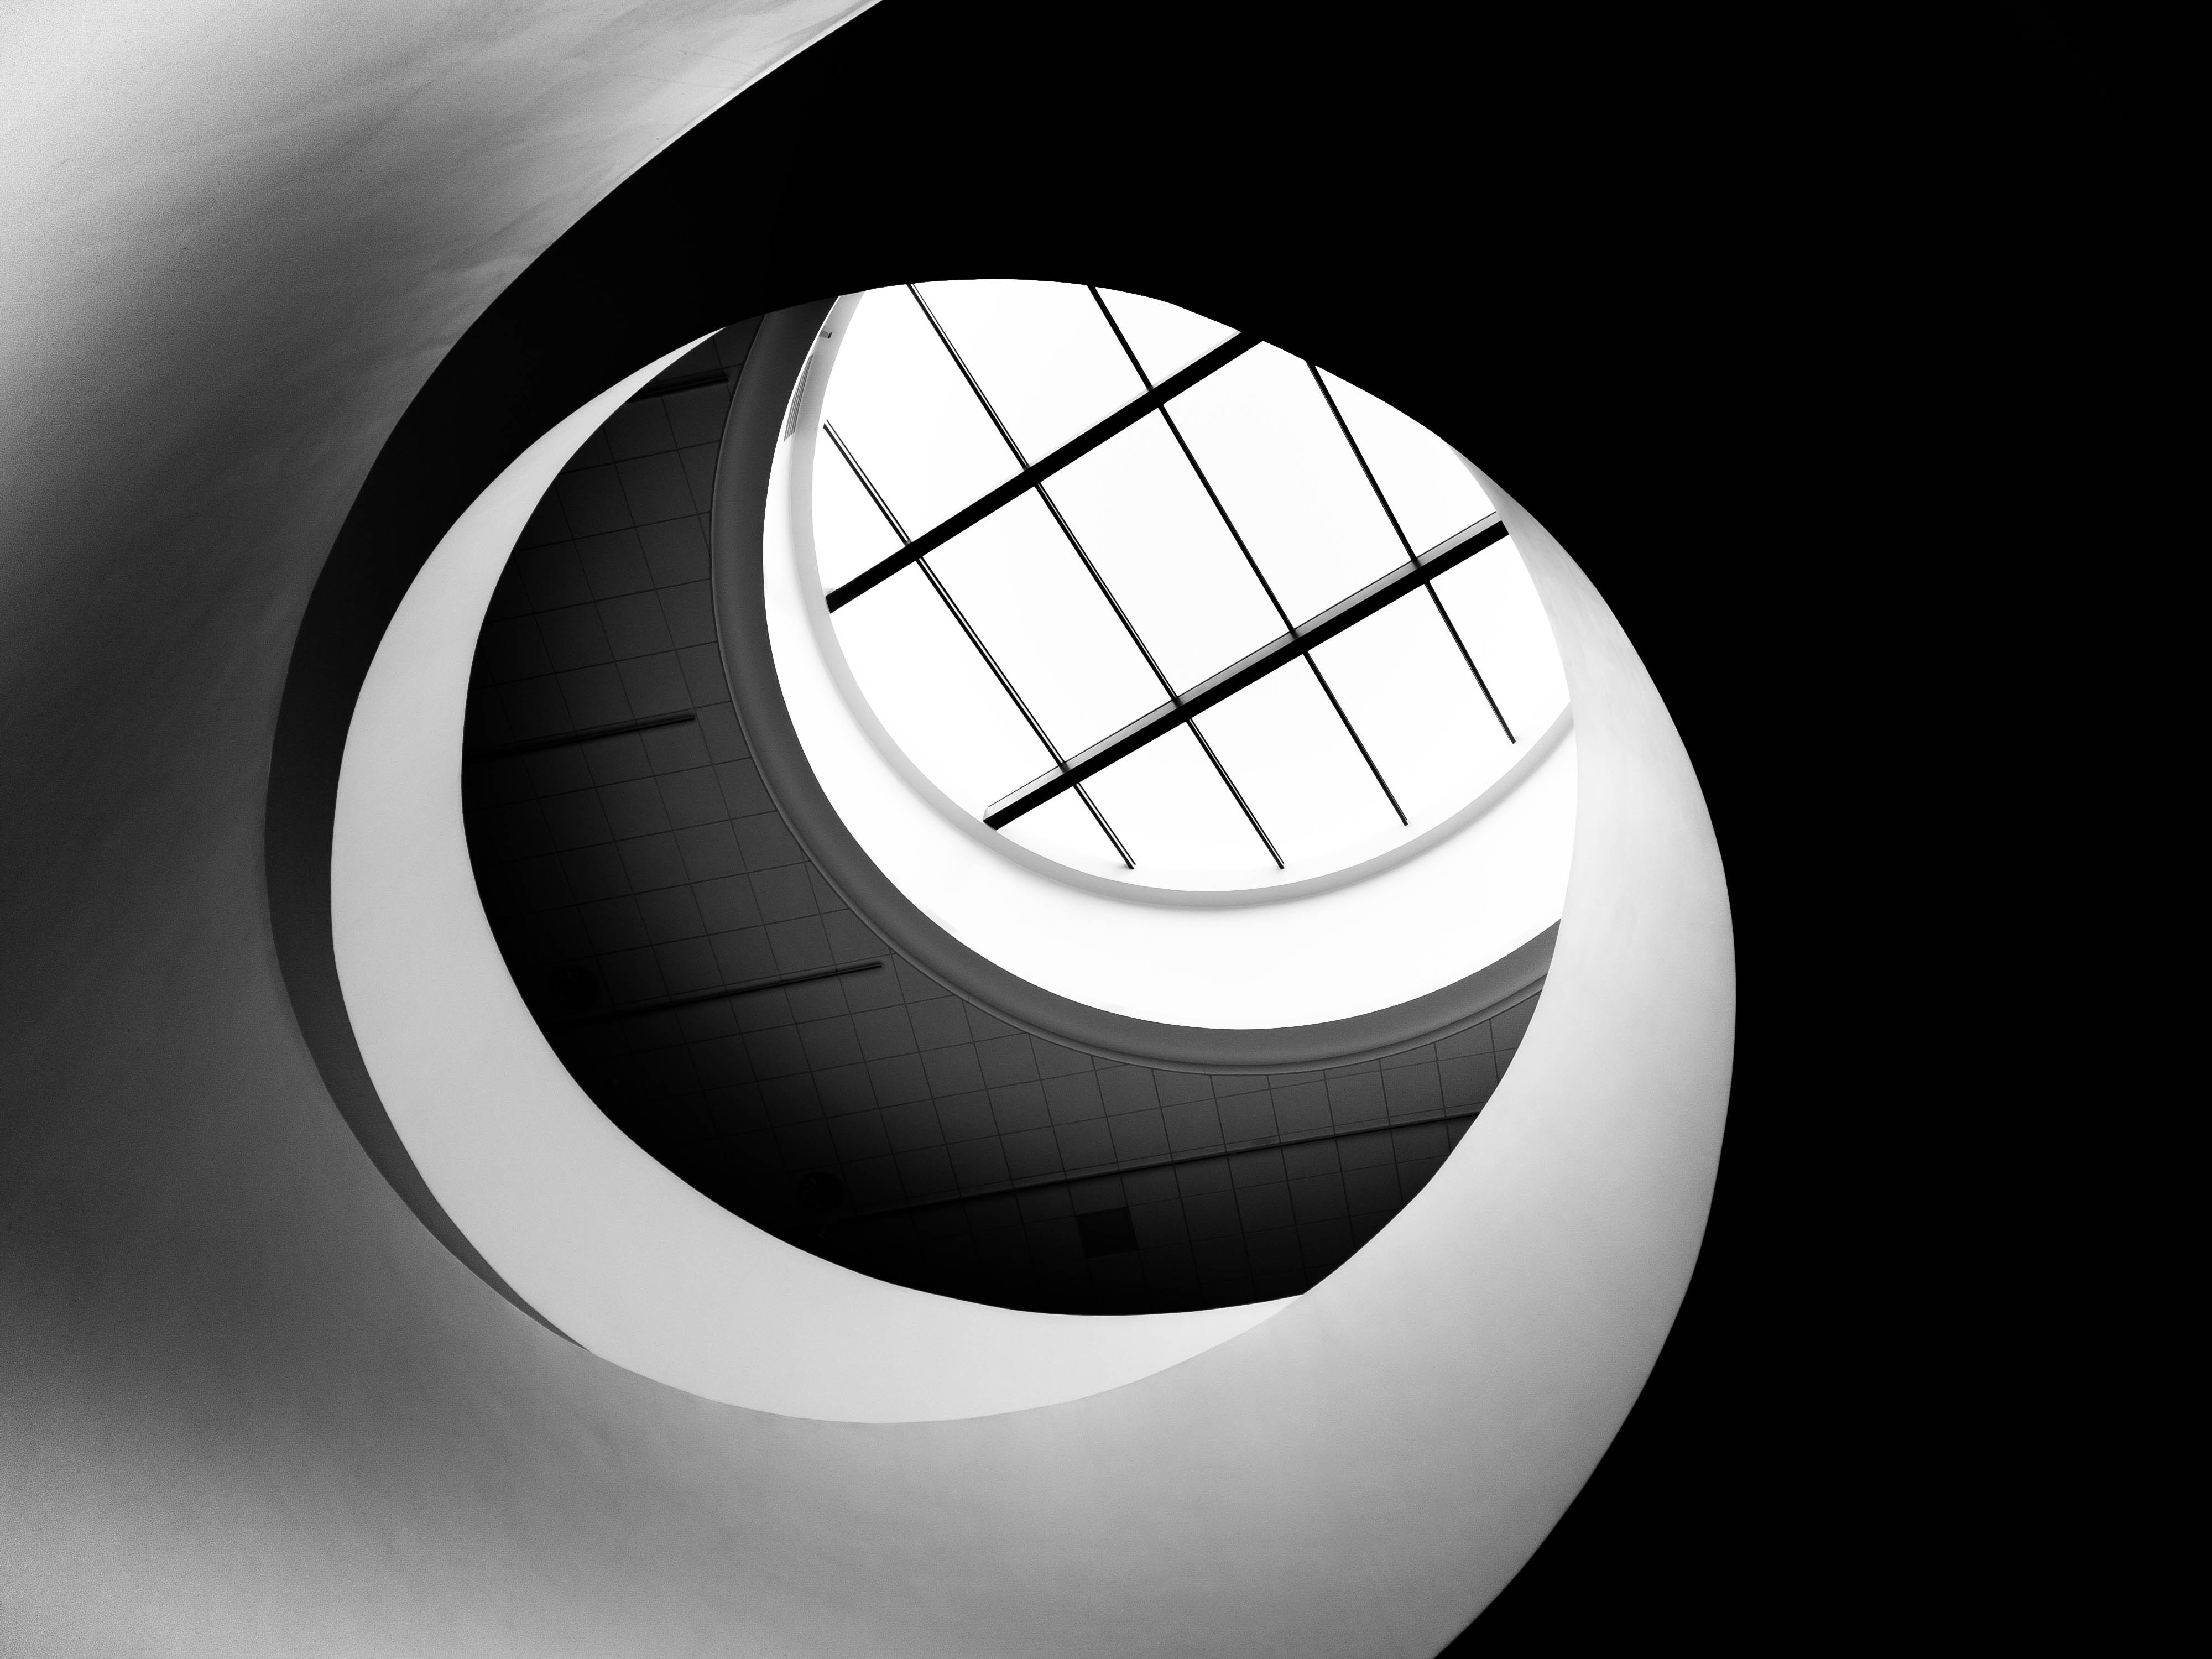 A round ceiling with a window in the center and two spirals surrounding the window opening. The right spiral is black and the left spiral is white.